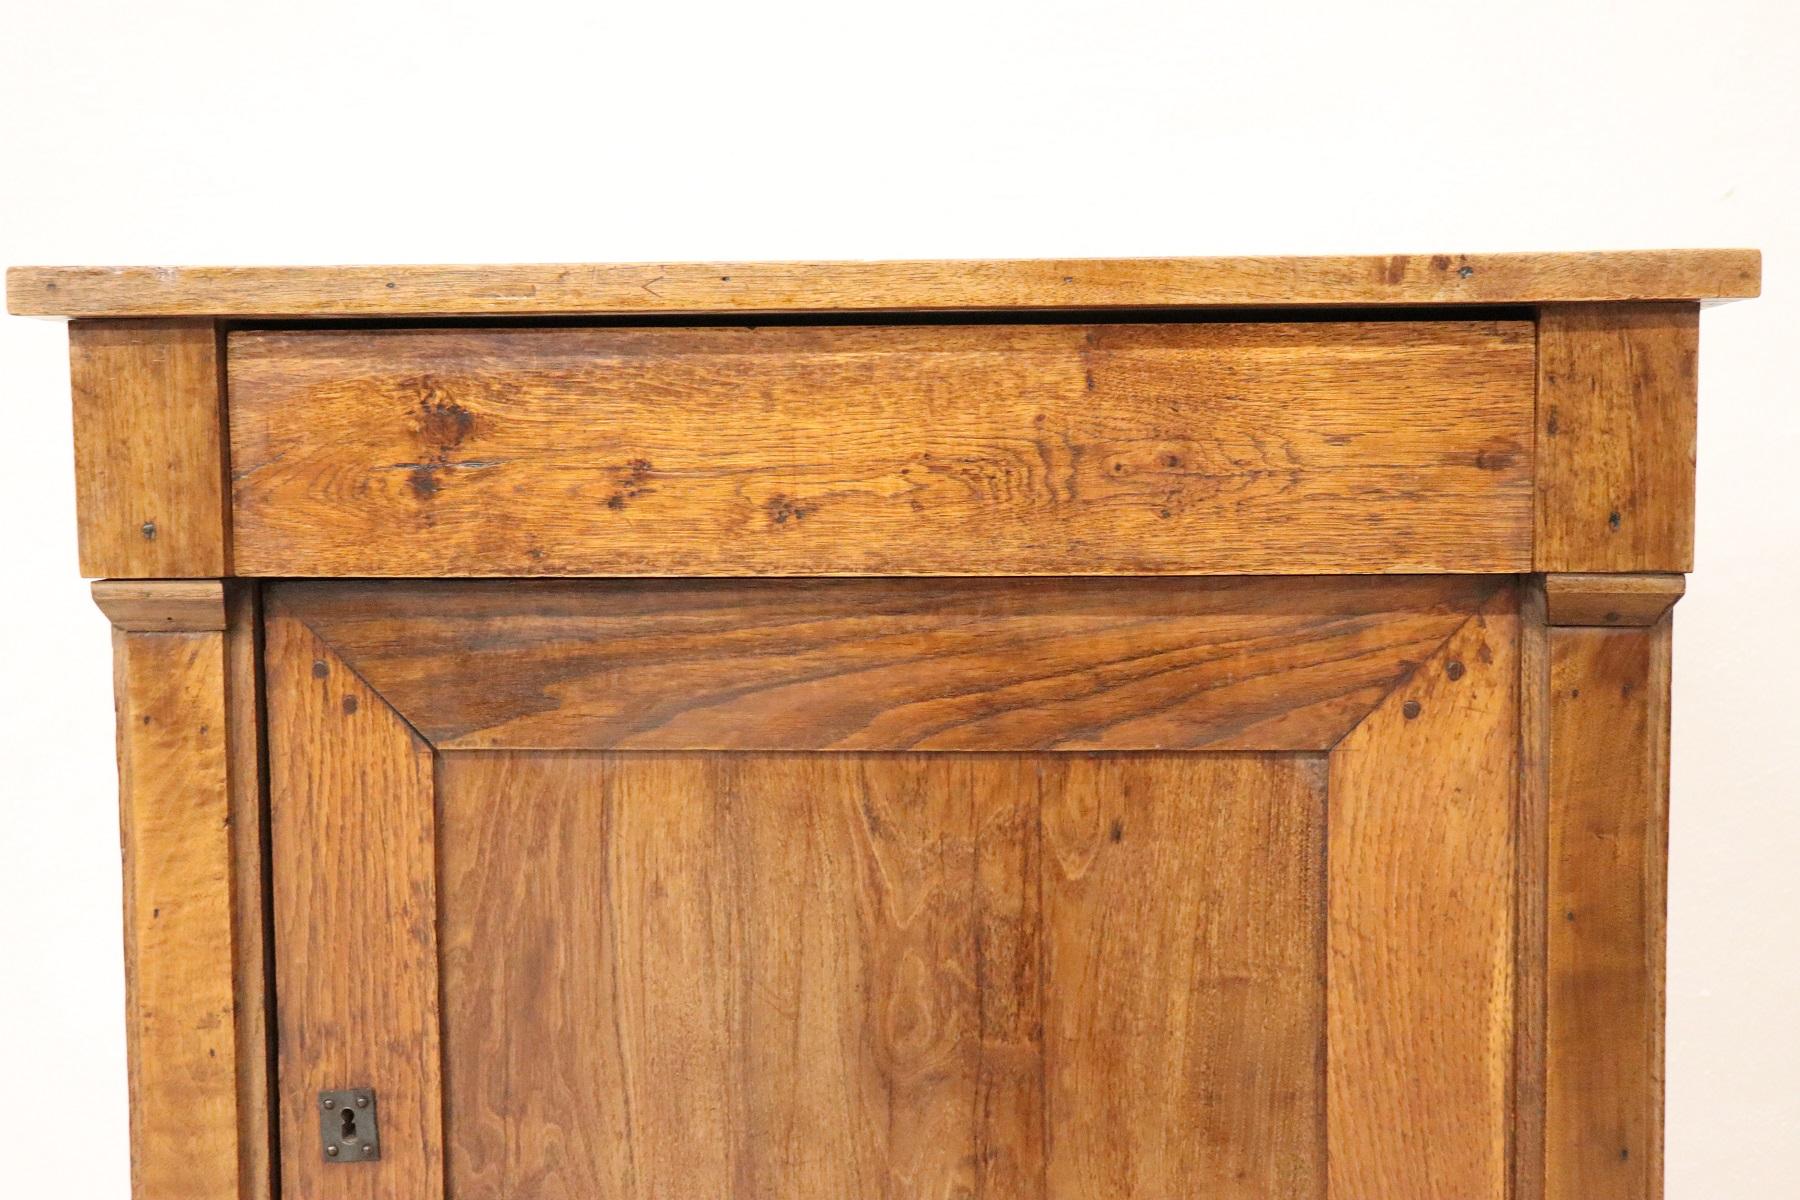 Particular small antique sideboard or cabinet in solid chestnut wood. Built in the second half of the nineteenth century empire line with feet with half pilasters on the front. Rustic furniture but very special for its small size suitable for any